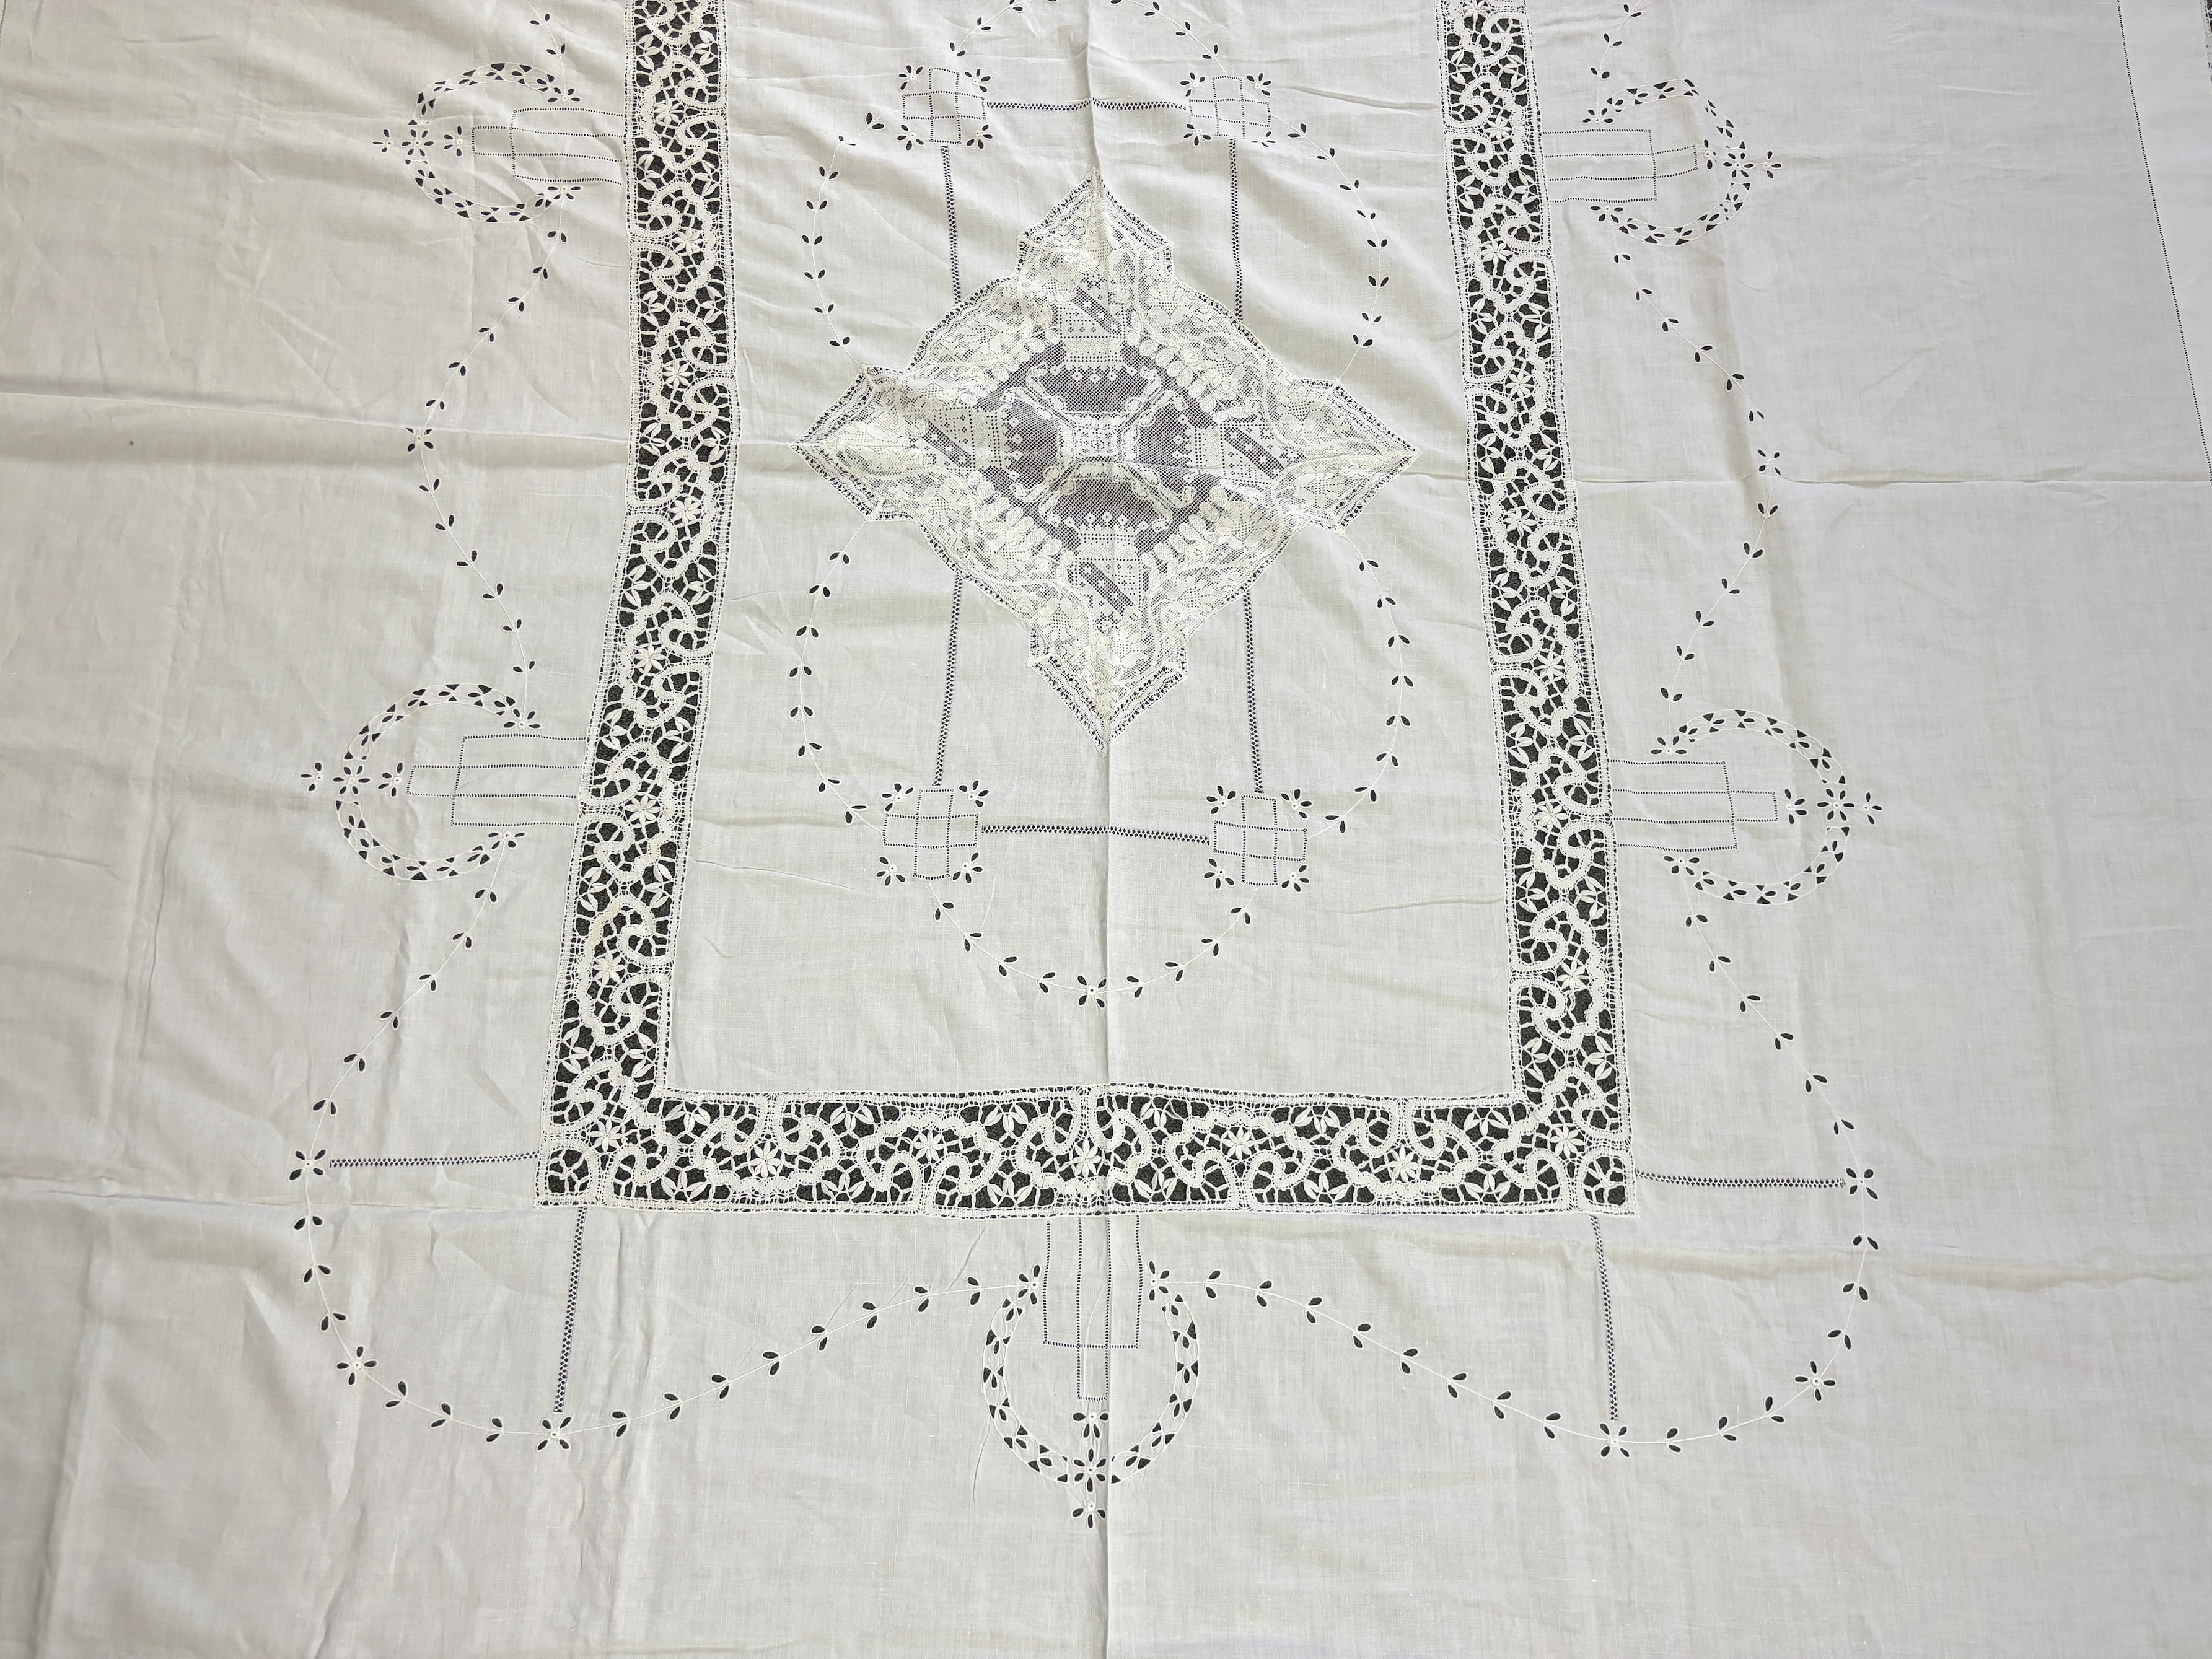 An Edwardian damask banqueting cloth 354cm long x 232 wide, worked with a central needle lace inserted cartouche, together with a smaller linen table cloth, 264cm long x 226cm wide, bordered with bobbin lace edges and si